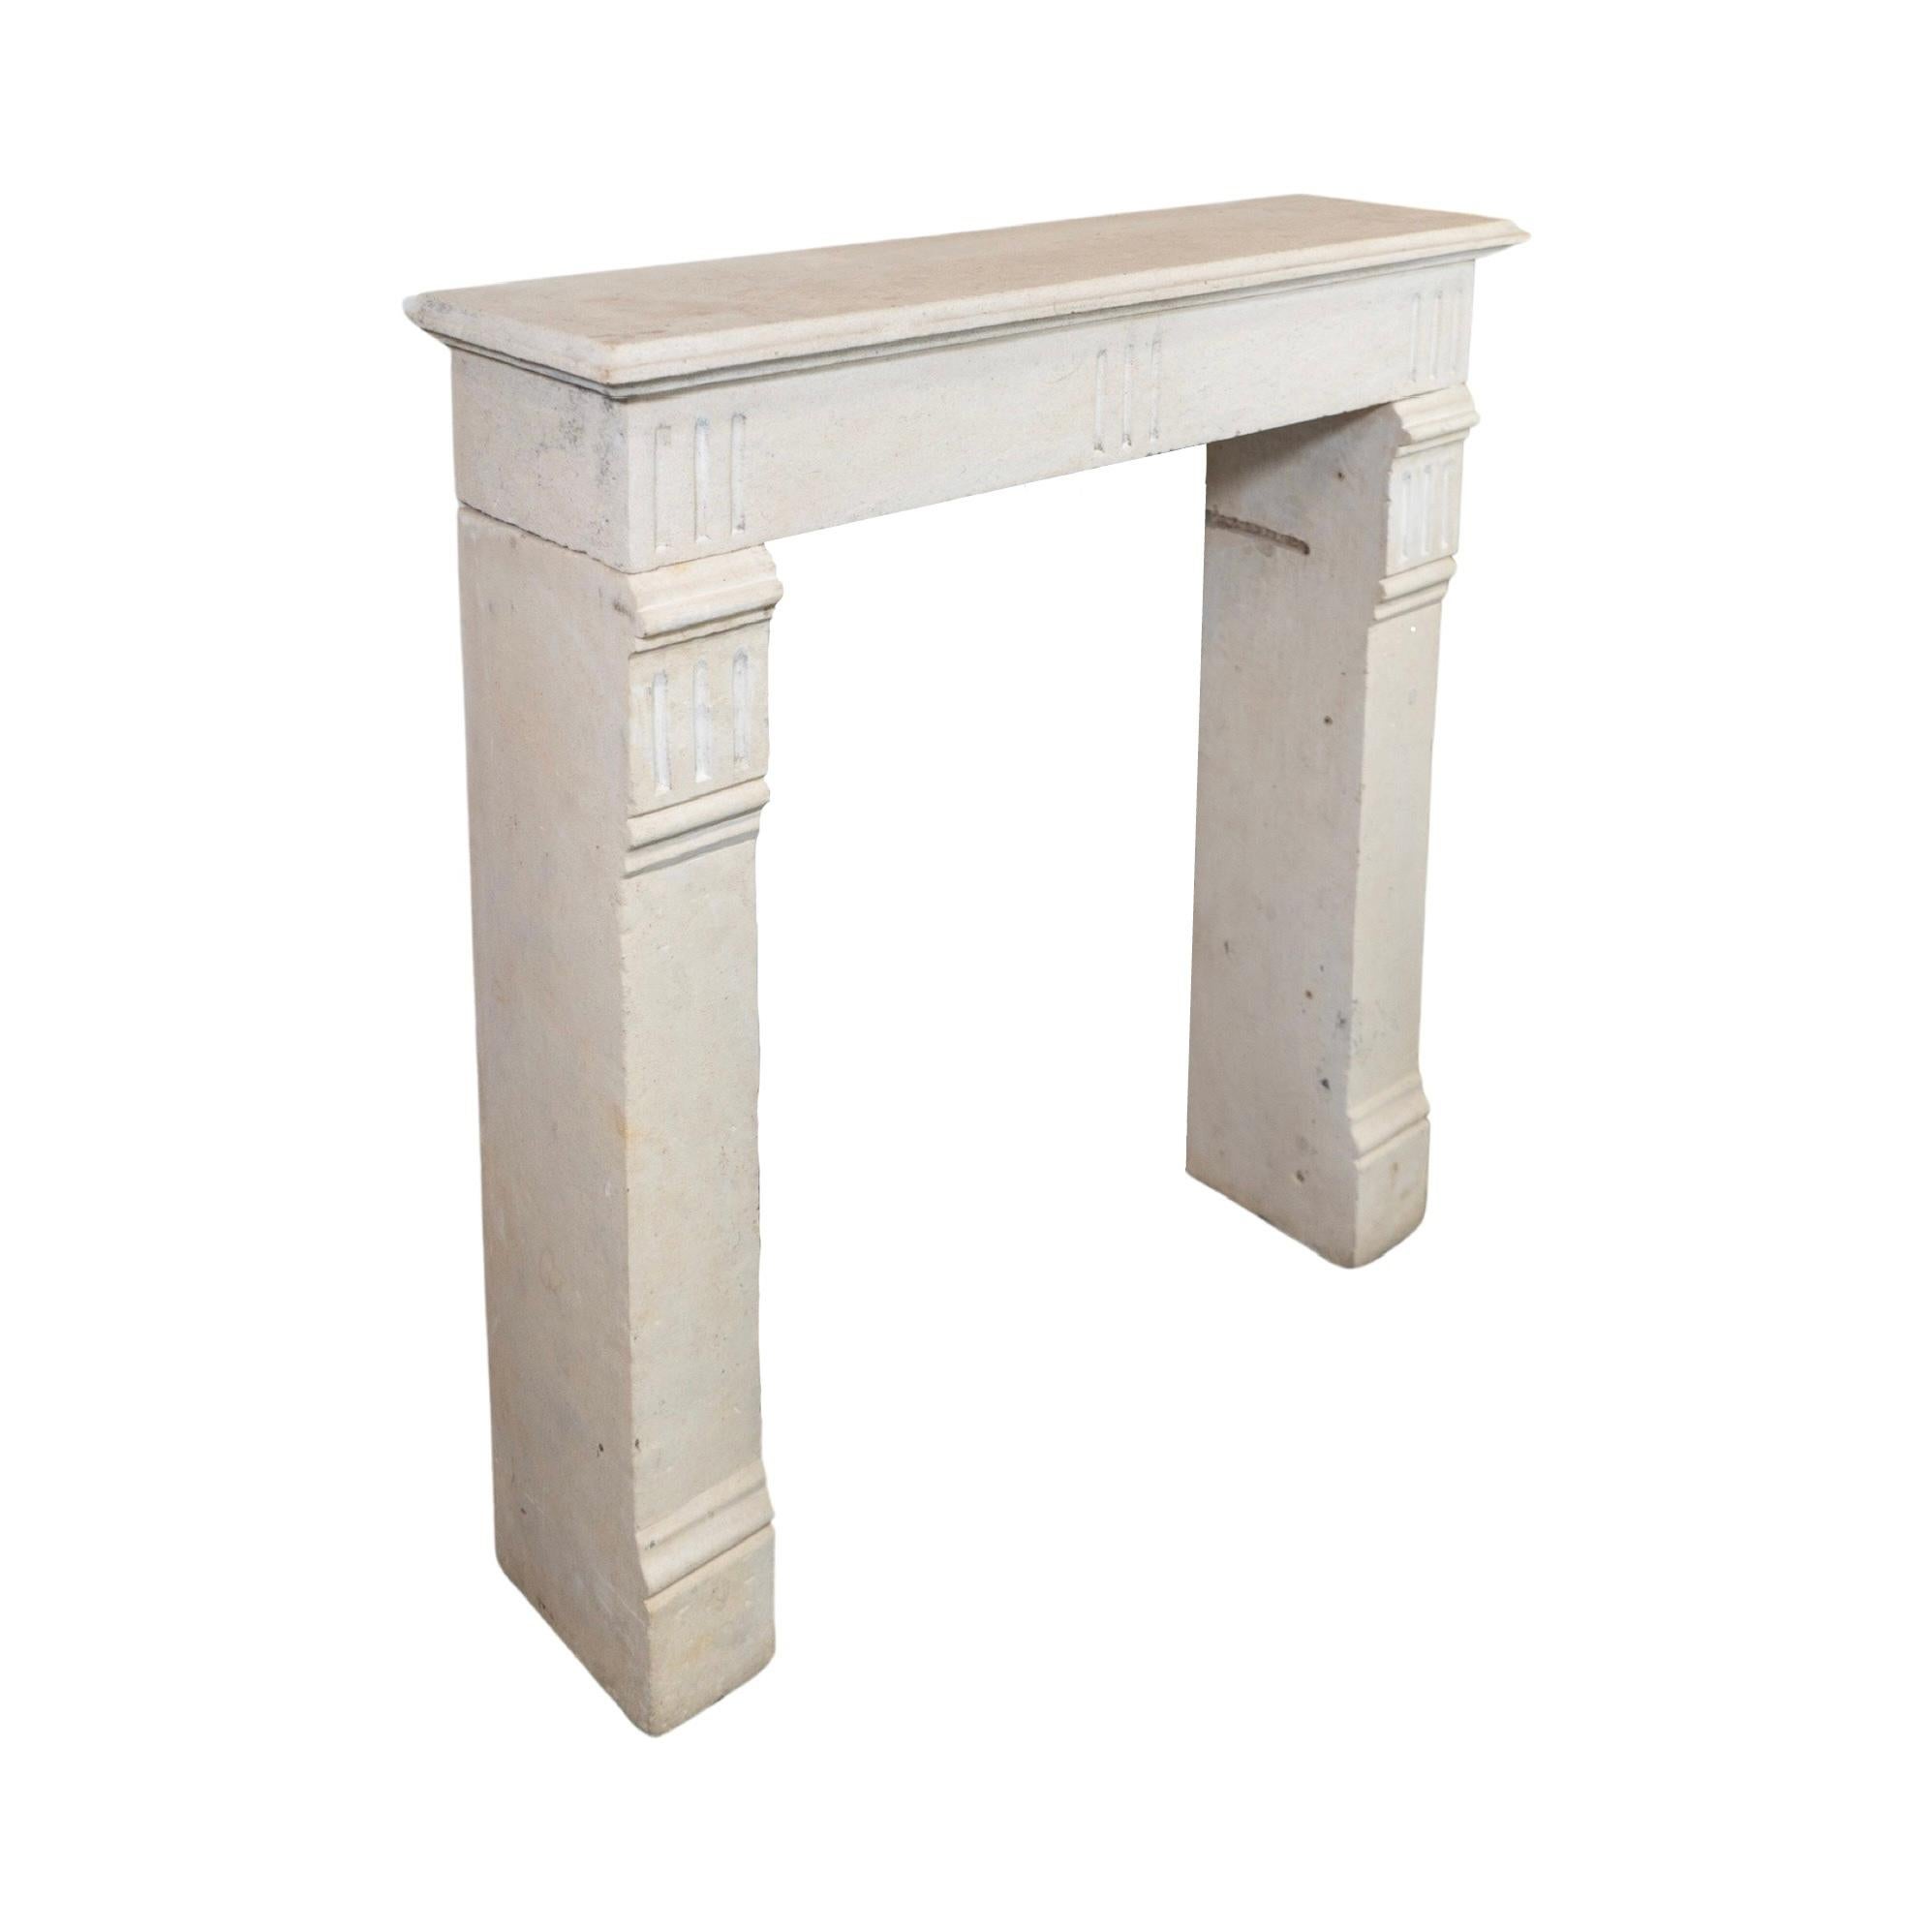 Mid-19th Century French Limestone Mantel For Sale